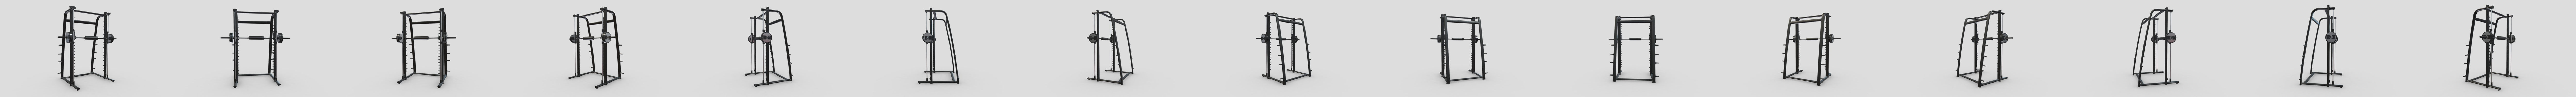 Technogym Selection Multipower Weight Rack - Buy Royalty Free 3D